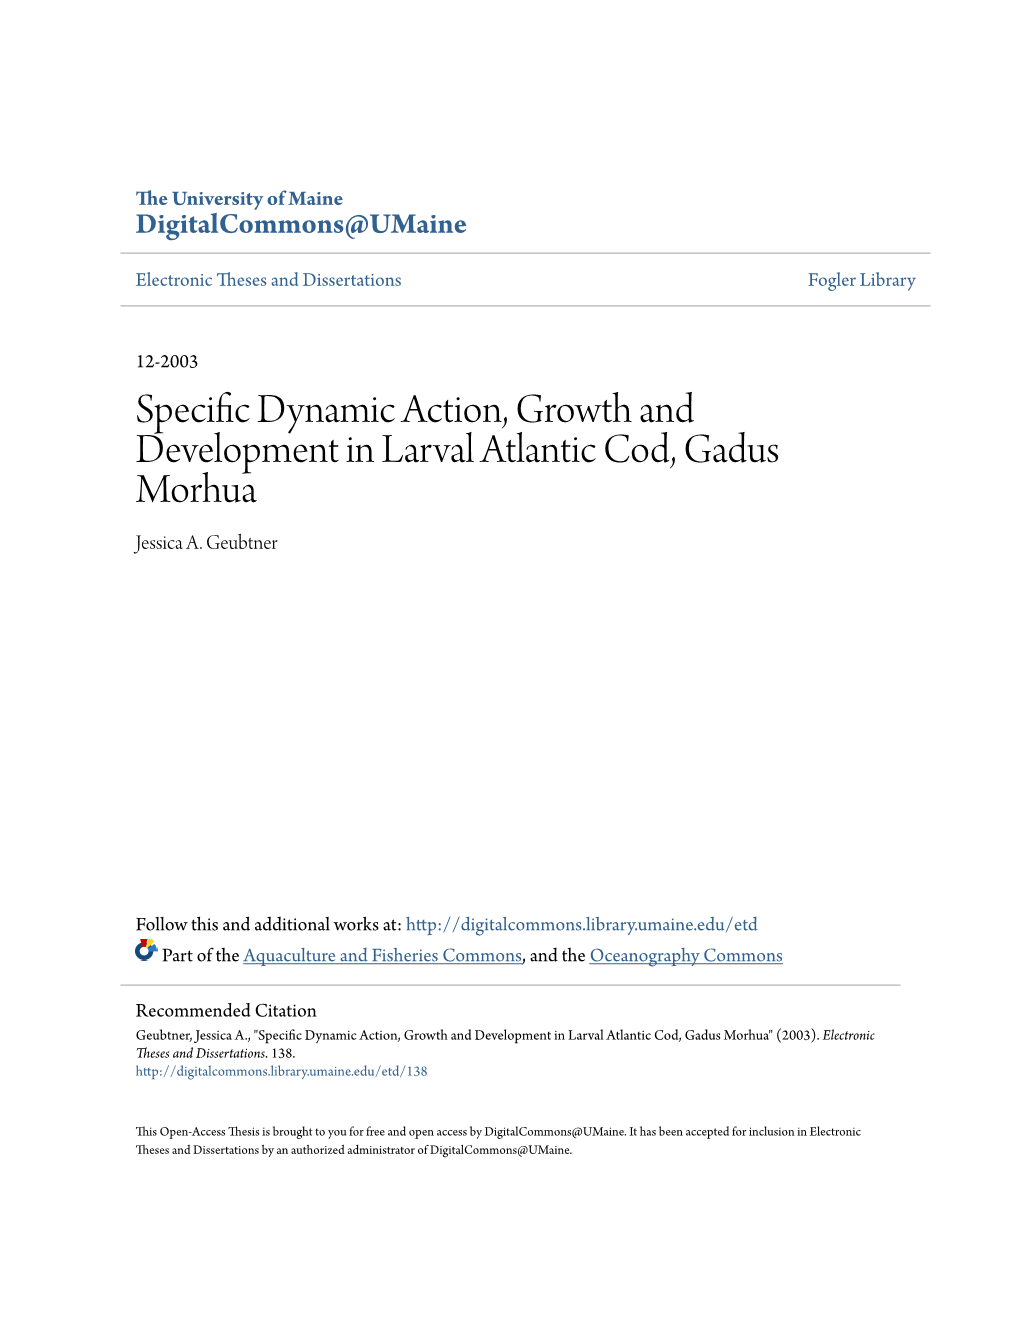 Specific Dynamic Action, Growth and Development in Larval Atlantic Cod, Gadus Morhua Jessica A